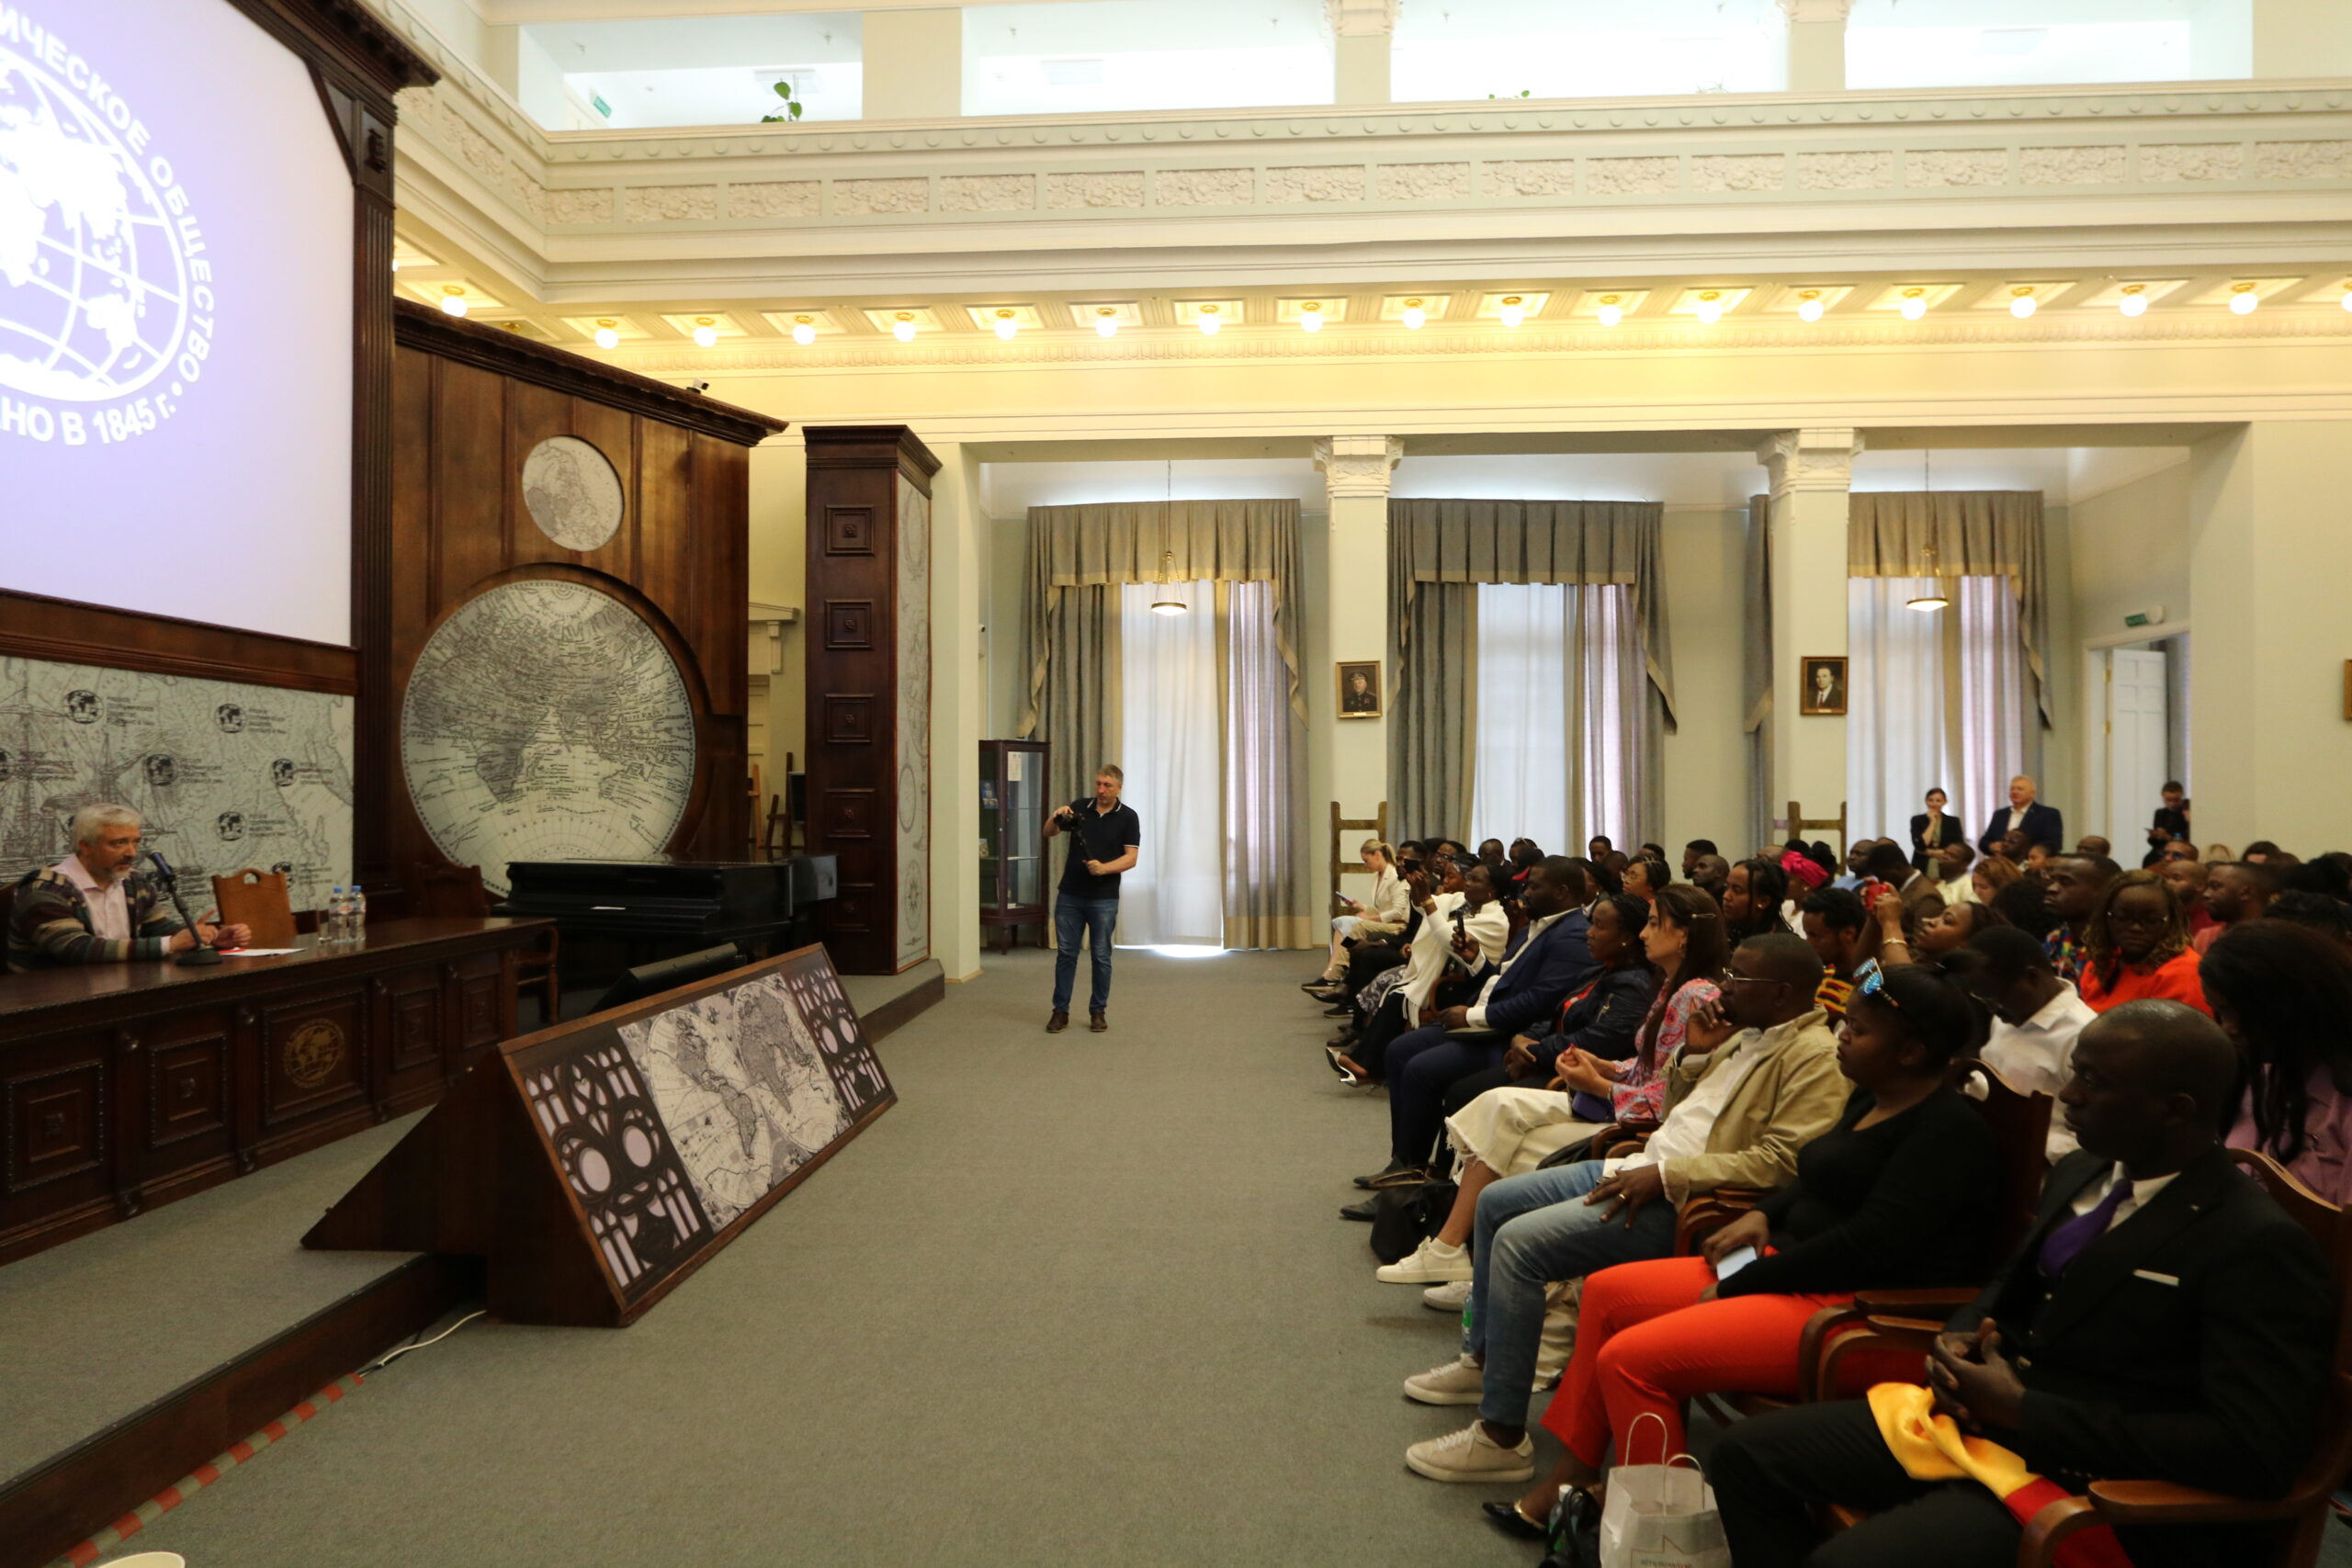 Events of the Russia-Africa forum were held at the Headquarters of the Russian Geographical Society in St. Petersburg